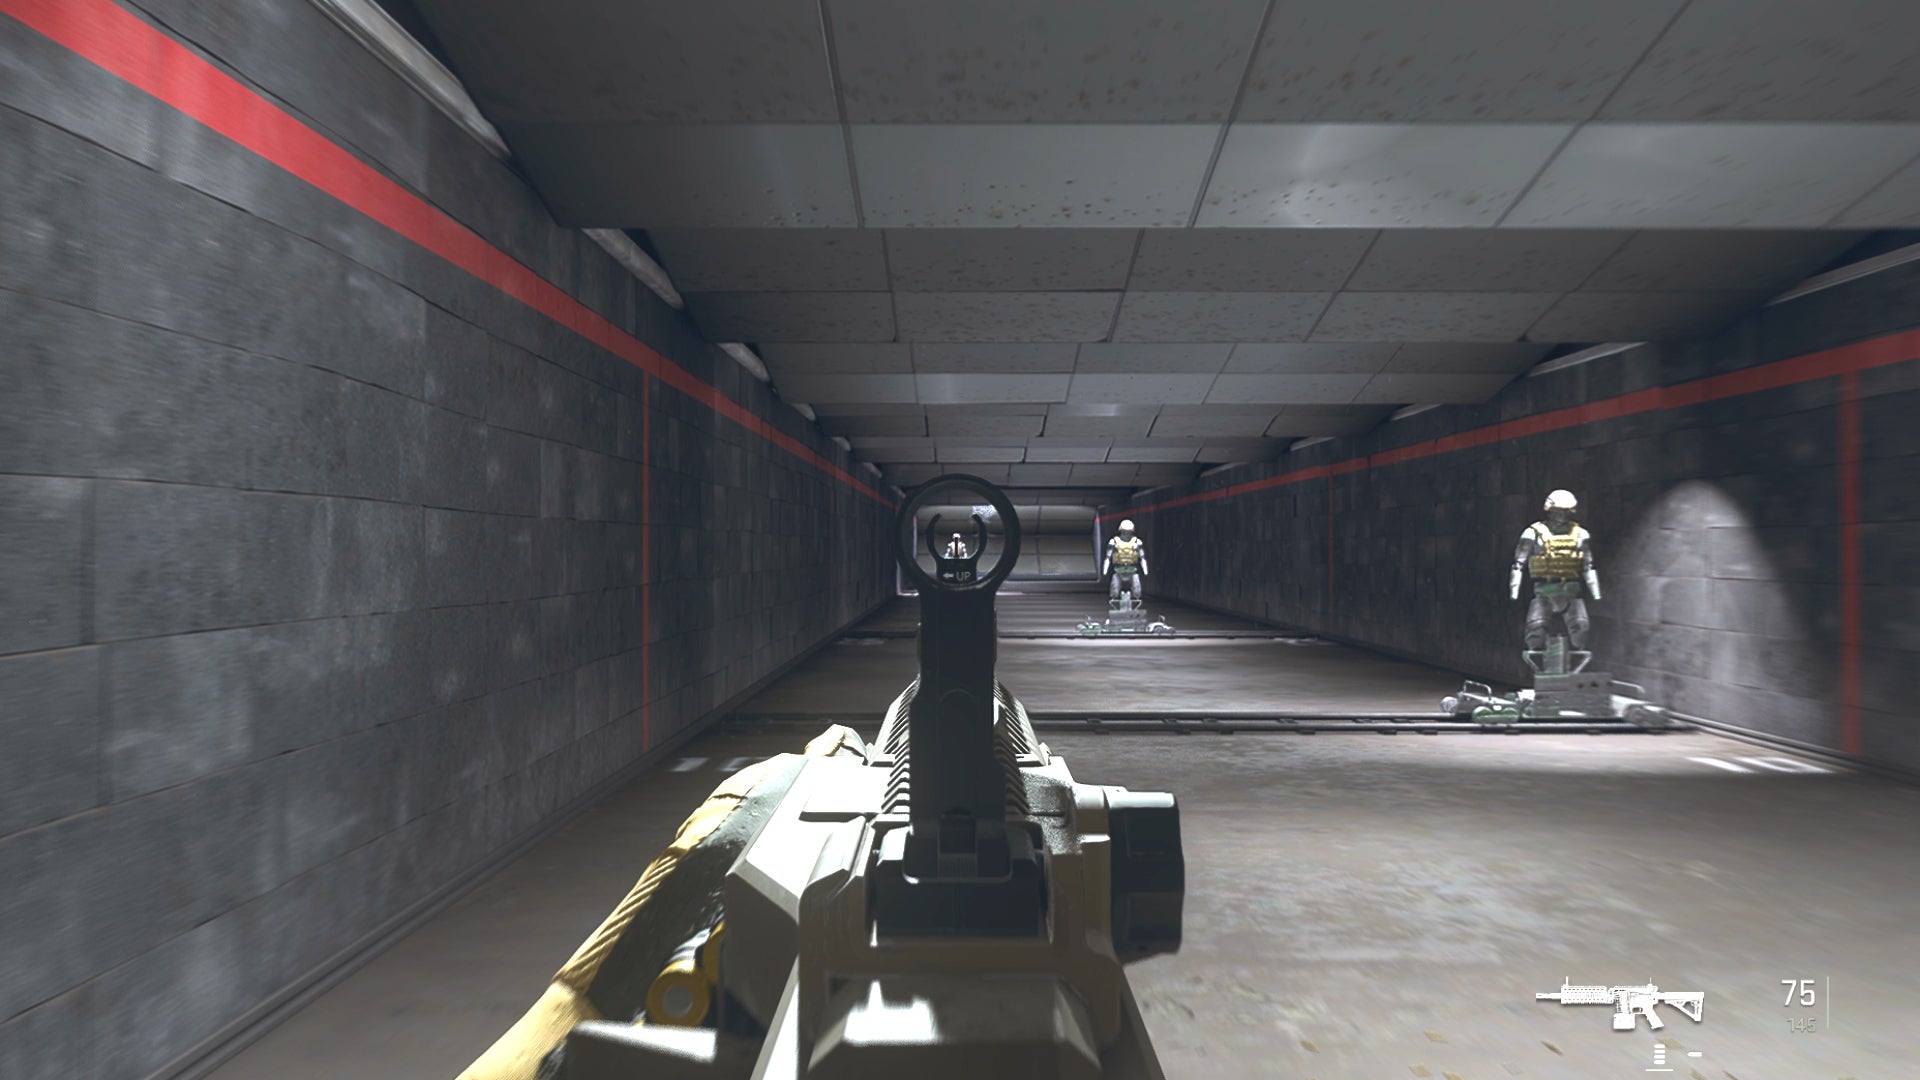 The player in Warzone 2.0 aims at a training dummy with the 556 Icarus ironsights.